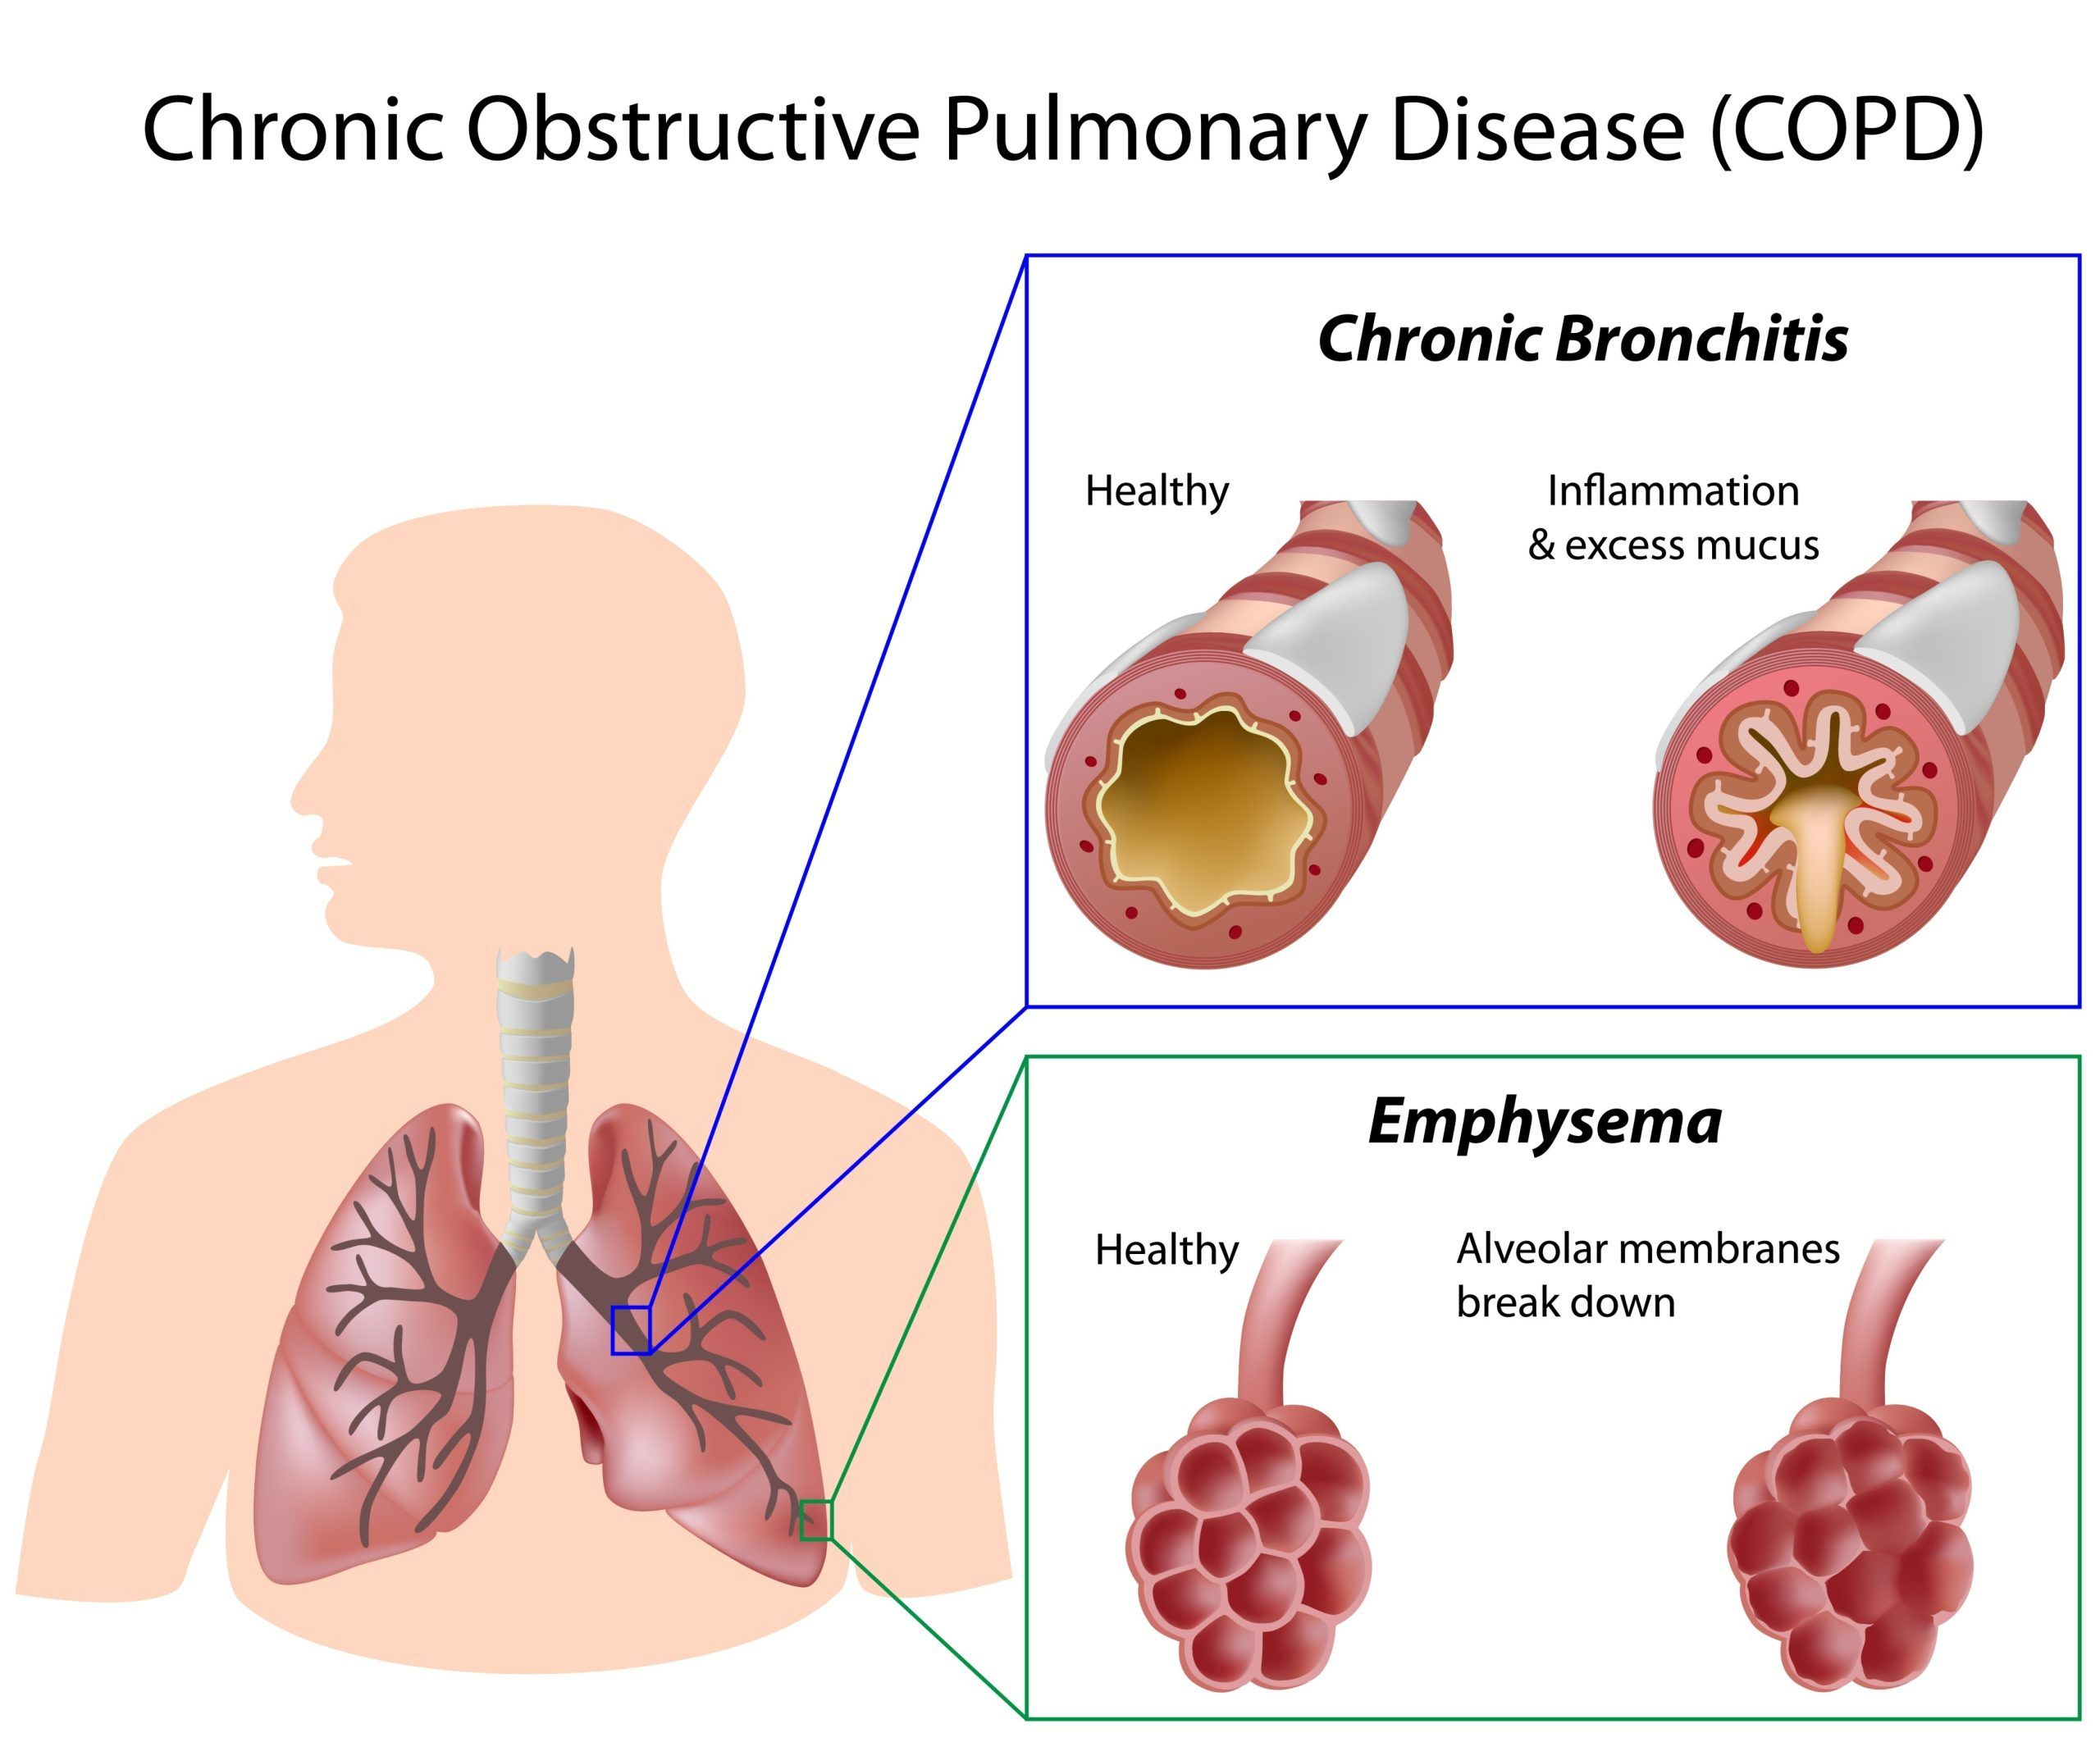 Advice for people with COPD